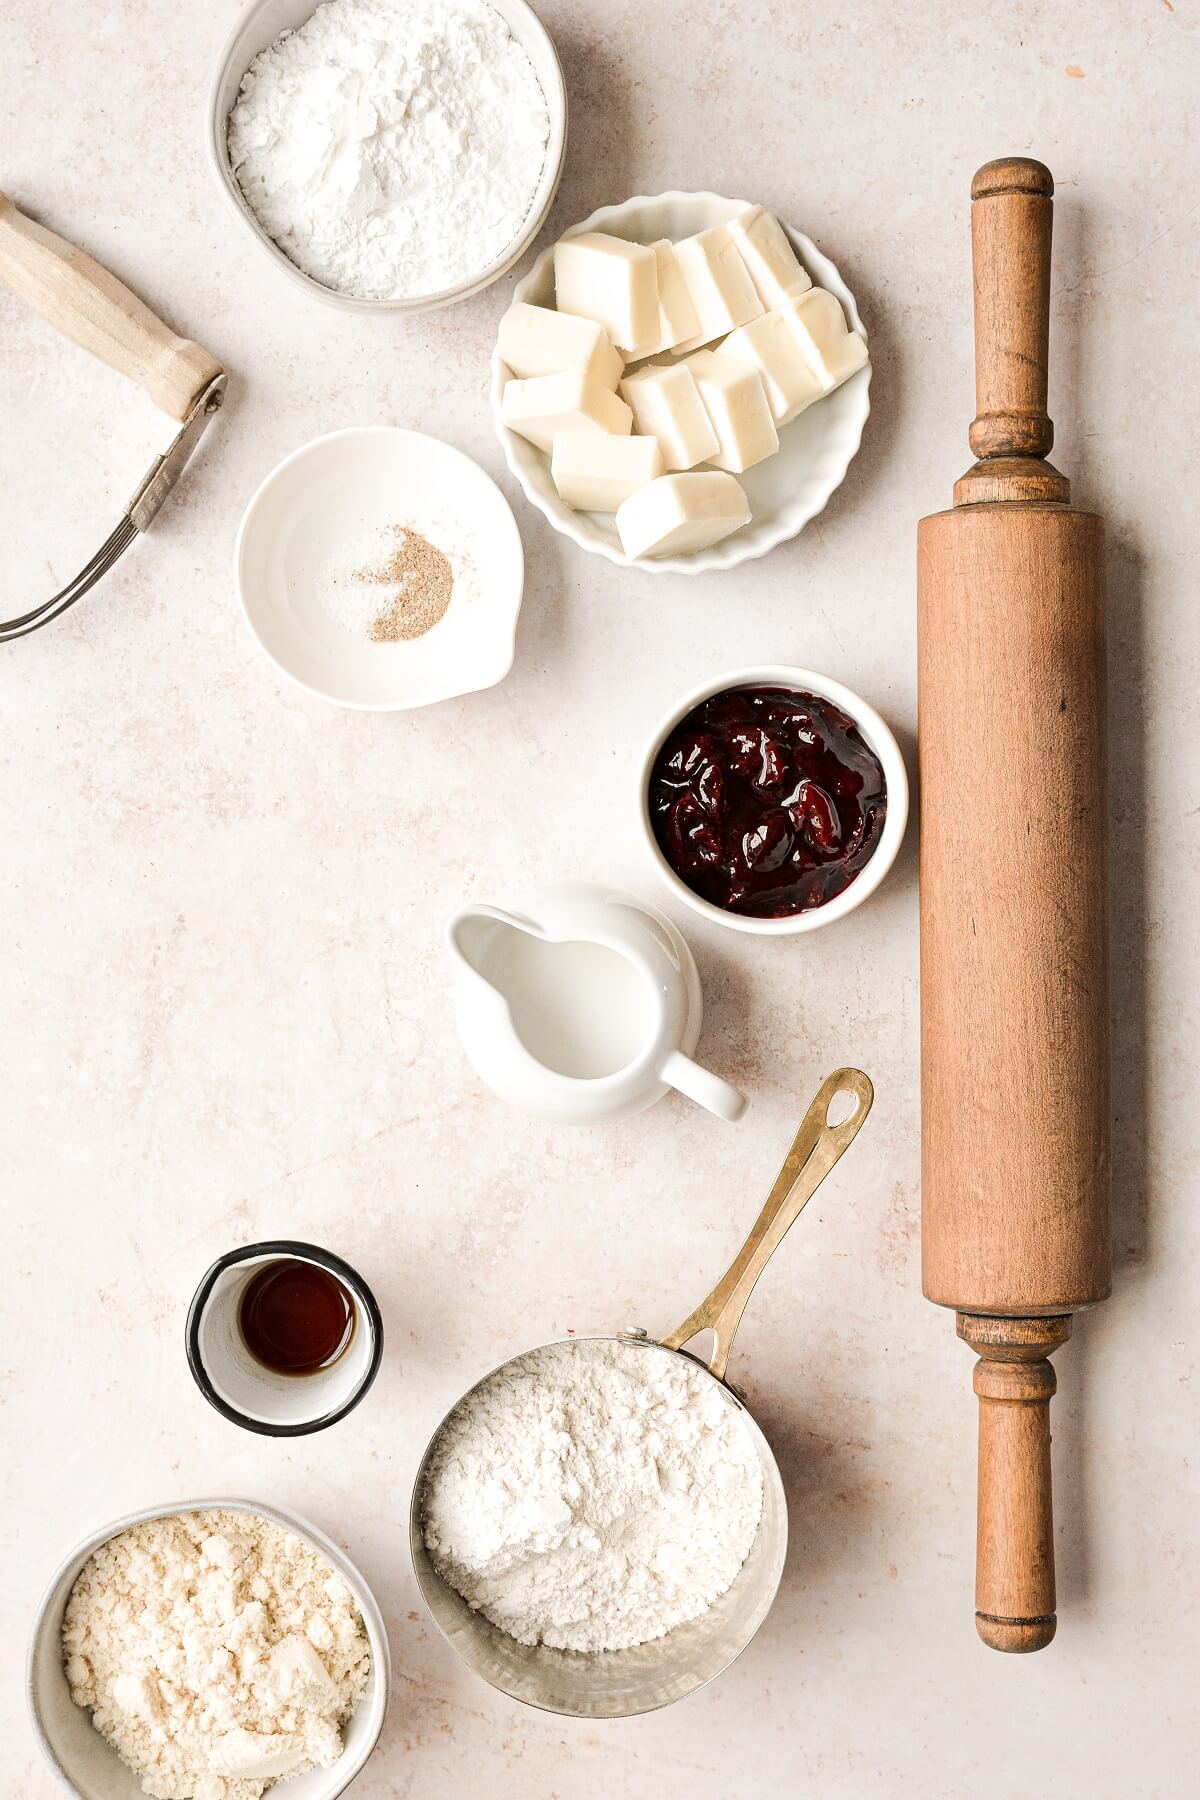 Ingredients for making linzer cookies next to a wooden rolling pin.